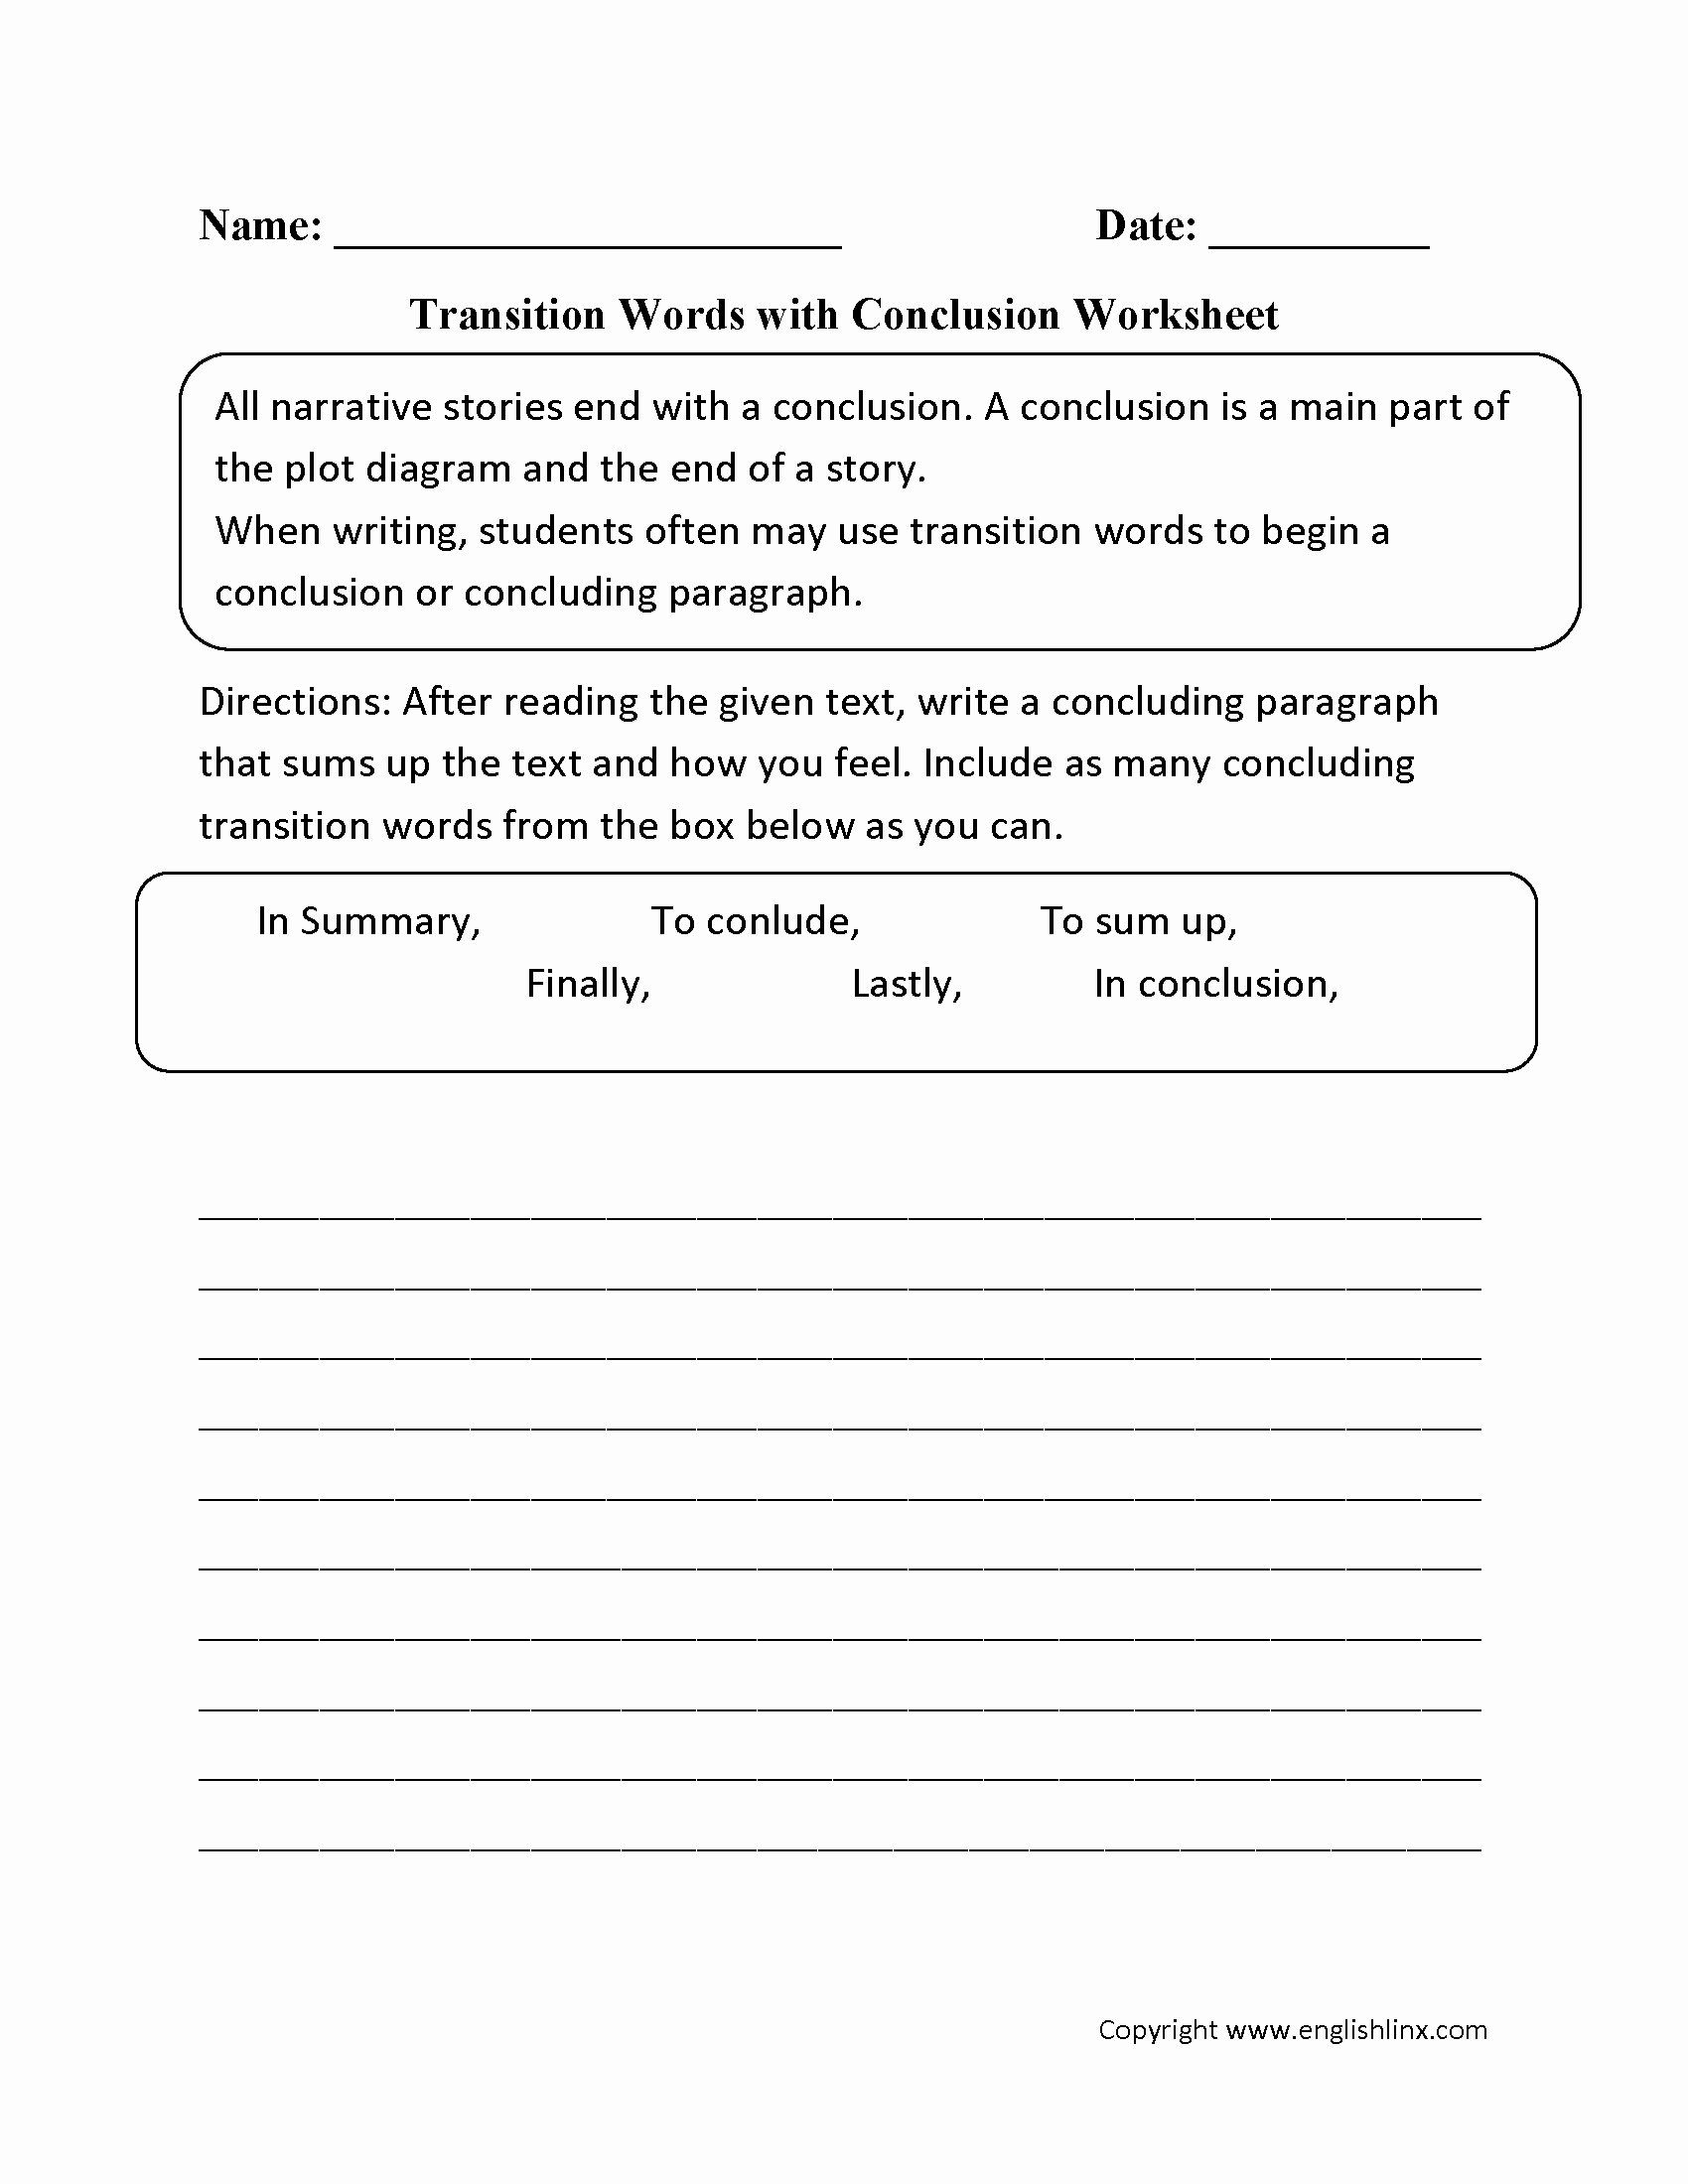 Drawing Conclusions Worksheets 4th Grade Lovely 88 [pdf] Worksheet On Drawing Conclusions for 4th Grade